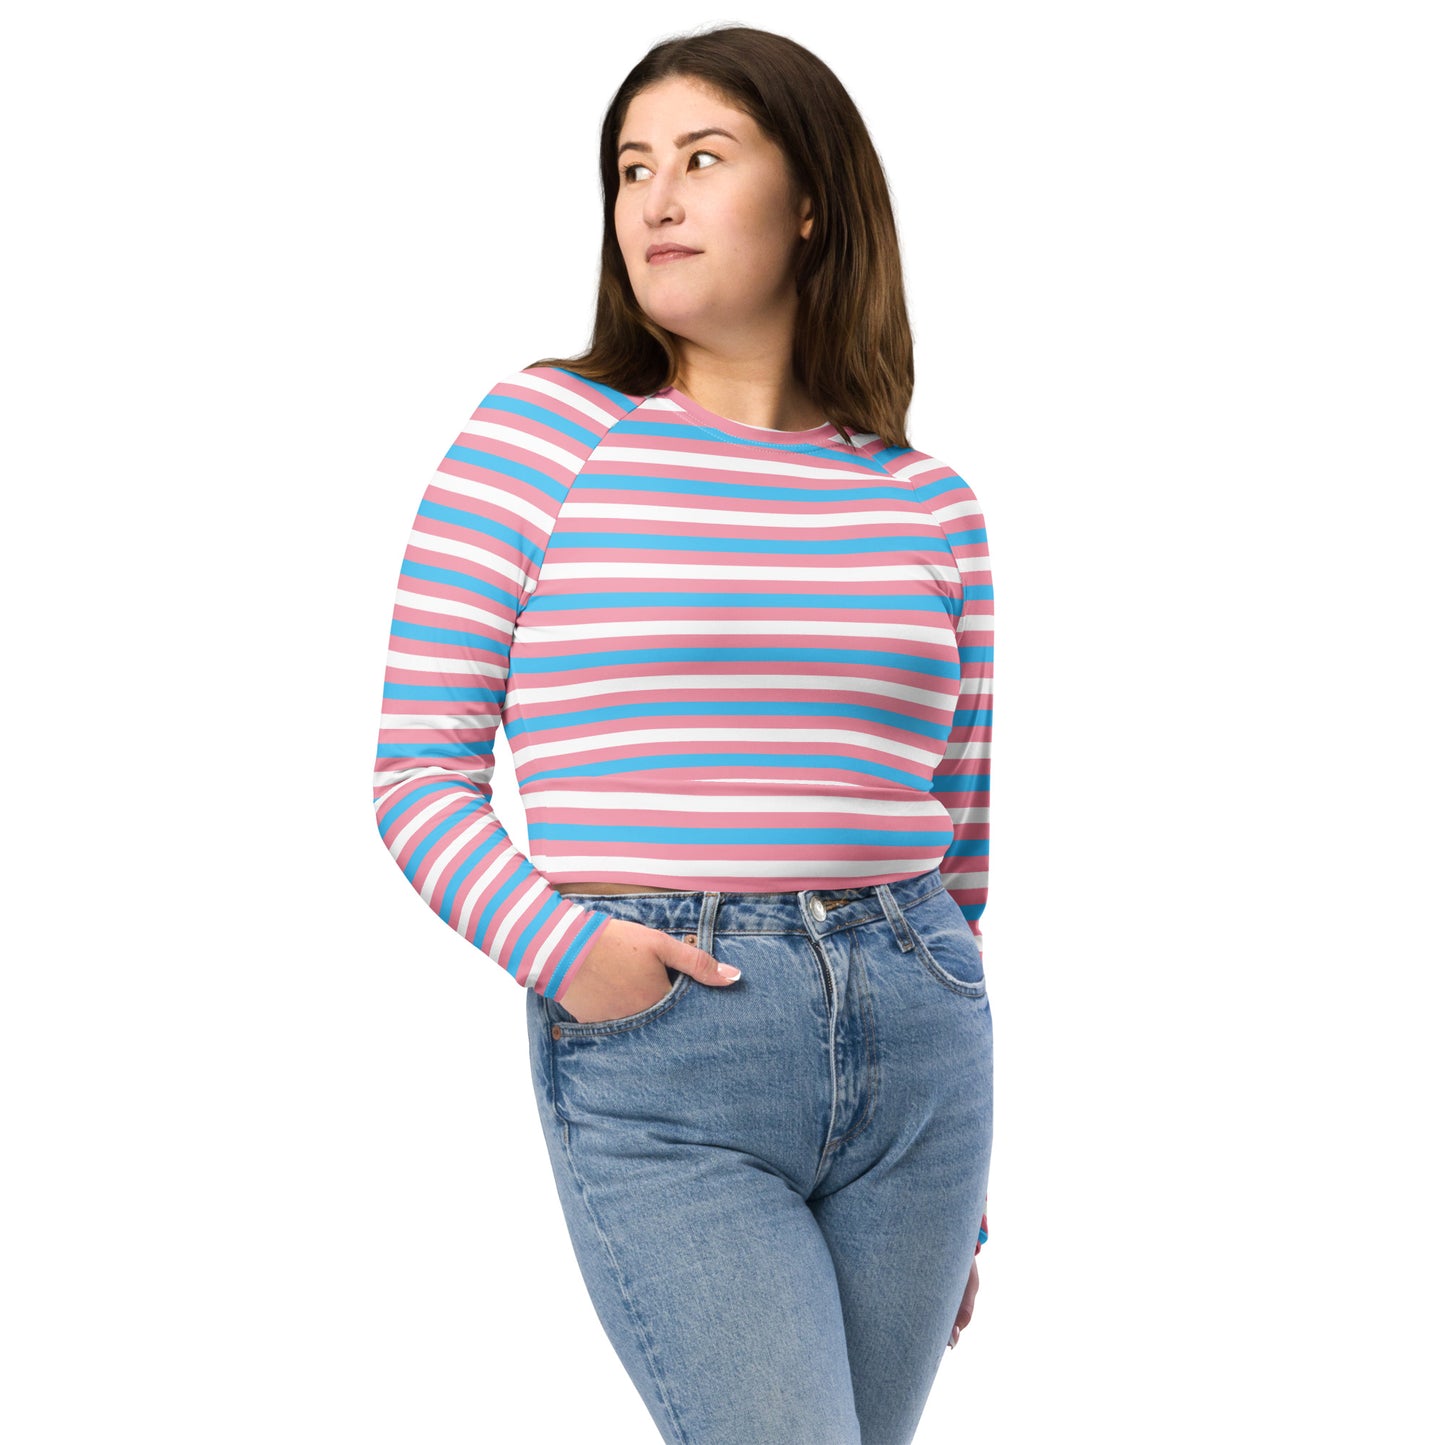 Transgender Pride Recycled Long Sleeve Crop Top - LGBTQIA Pink White Blue Flag Cropped Shirt - Parade Club Swimming